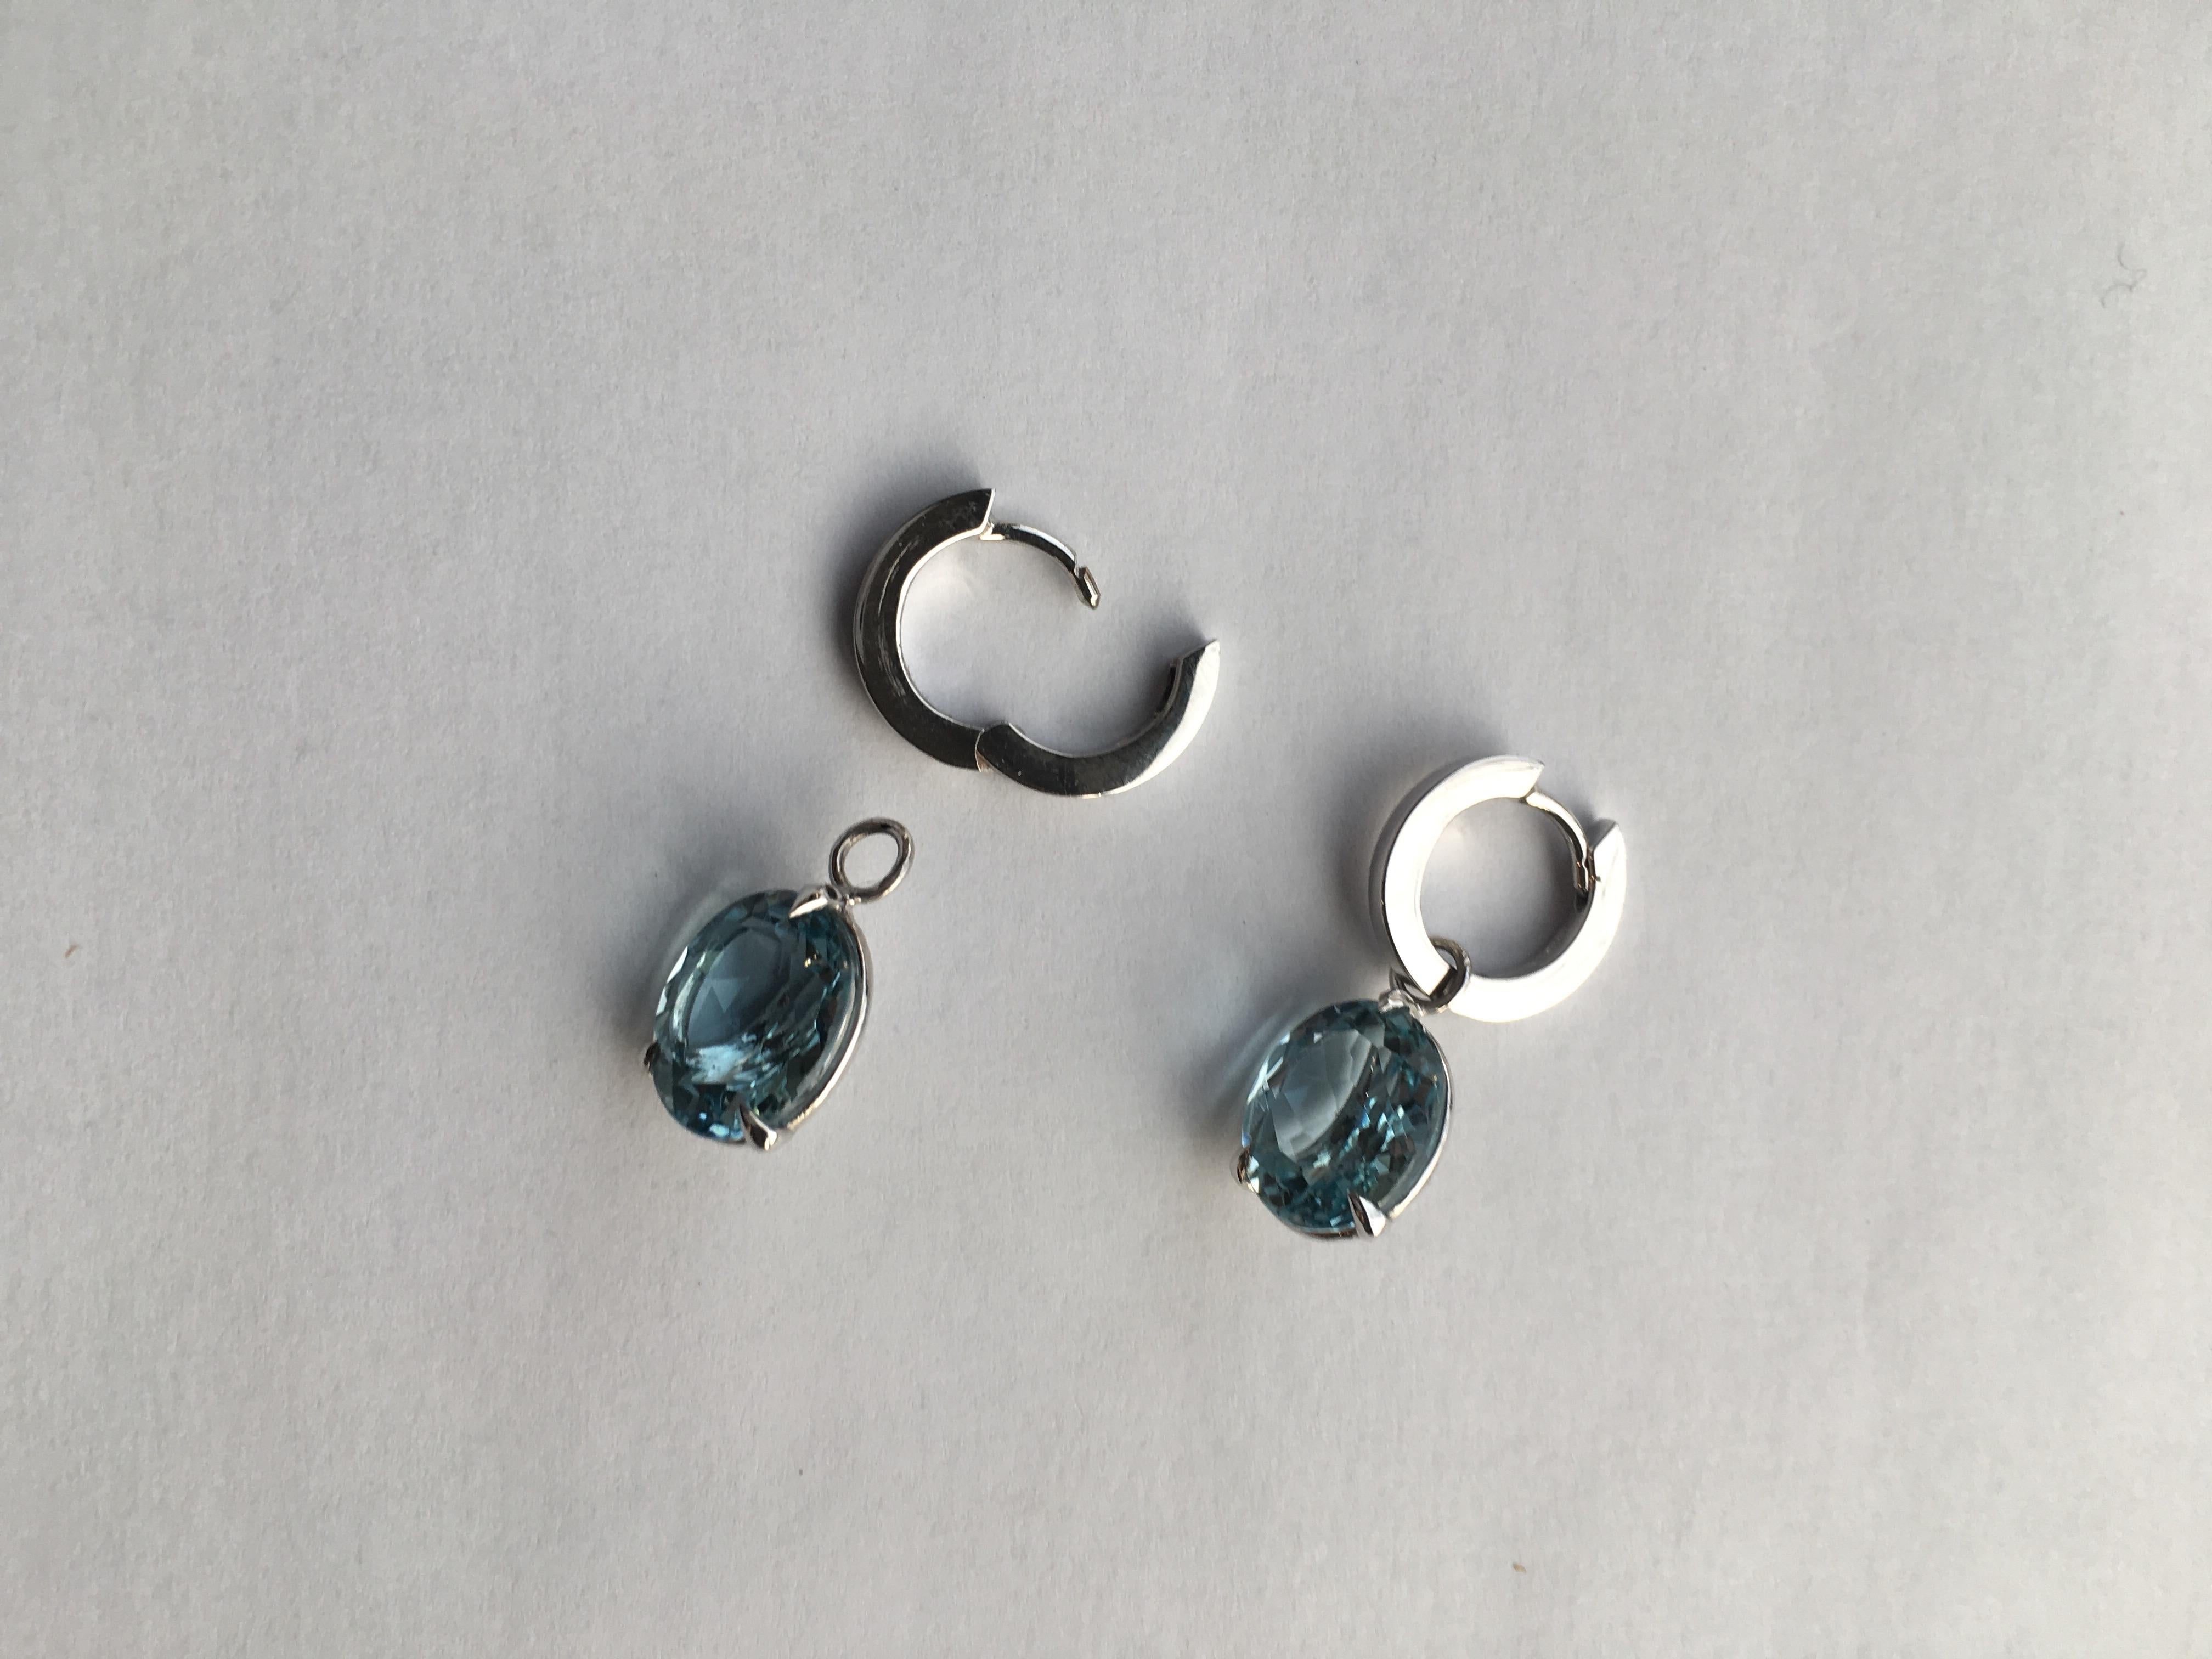 A pair of beautiful oval faceted aquamarine earrings. A splendid blue oval aquamarine hangs from a pair of round hoops in 18 Karat white gold. 

The aquamarines are detachable so you can wear the hoops on their own or with other gemstones or pearls.